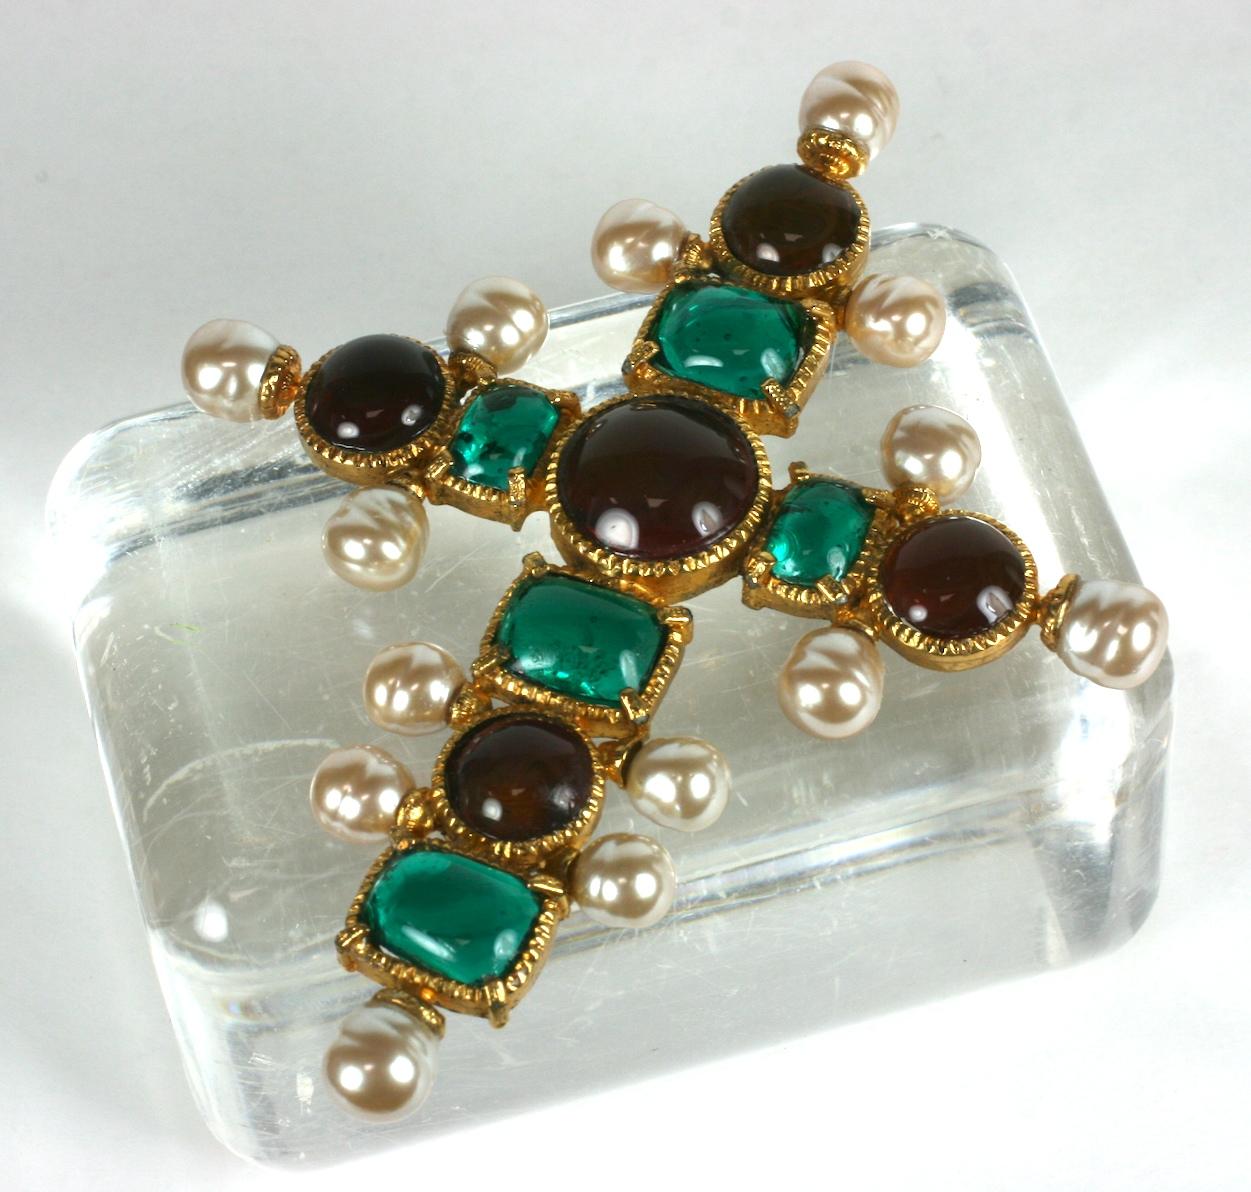 Maison Gripoix for Chanel Renaissance cross pendant brooch from 1992 Autumn/Winter. Of ruby and emerald poured glass enamel round and rectangular cabochons. Set in gilded bronze with handmade baroque nacre Maison Gripoix pearls.
Worn in a ruby color